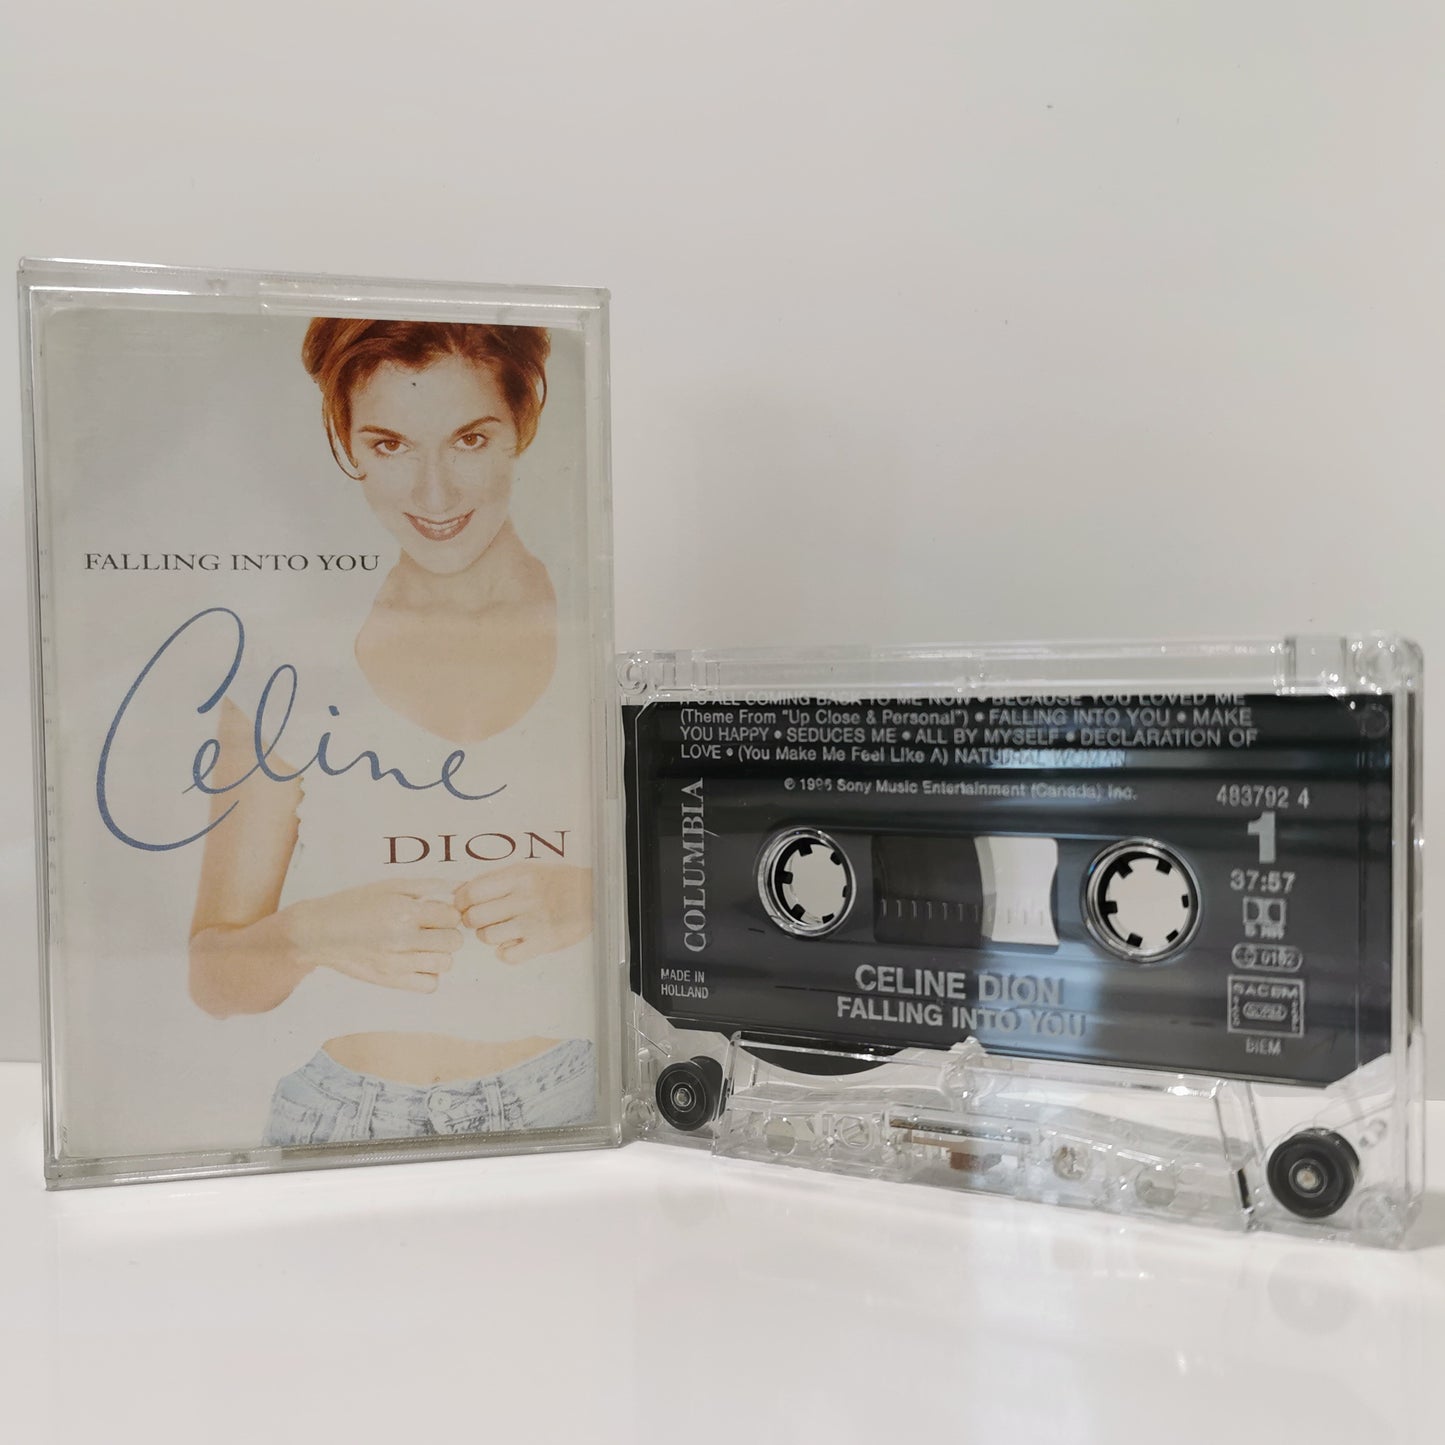 CELINE DION - Falling into you